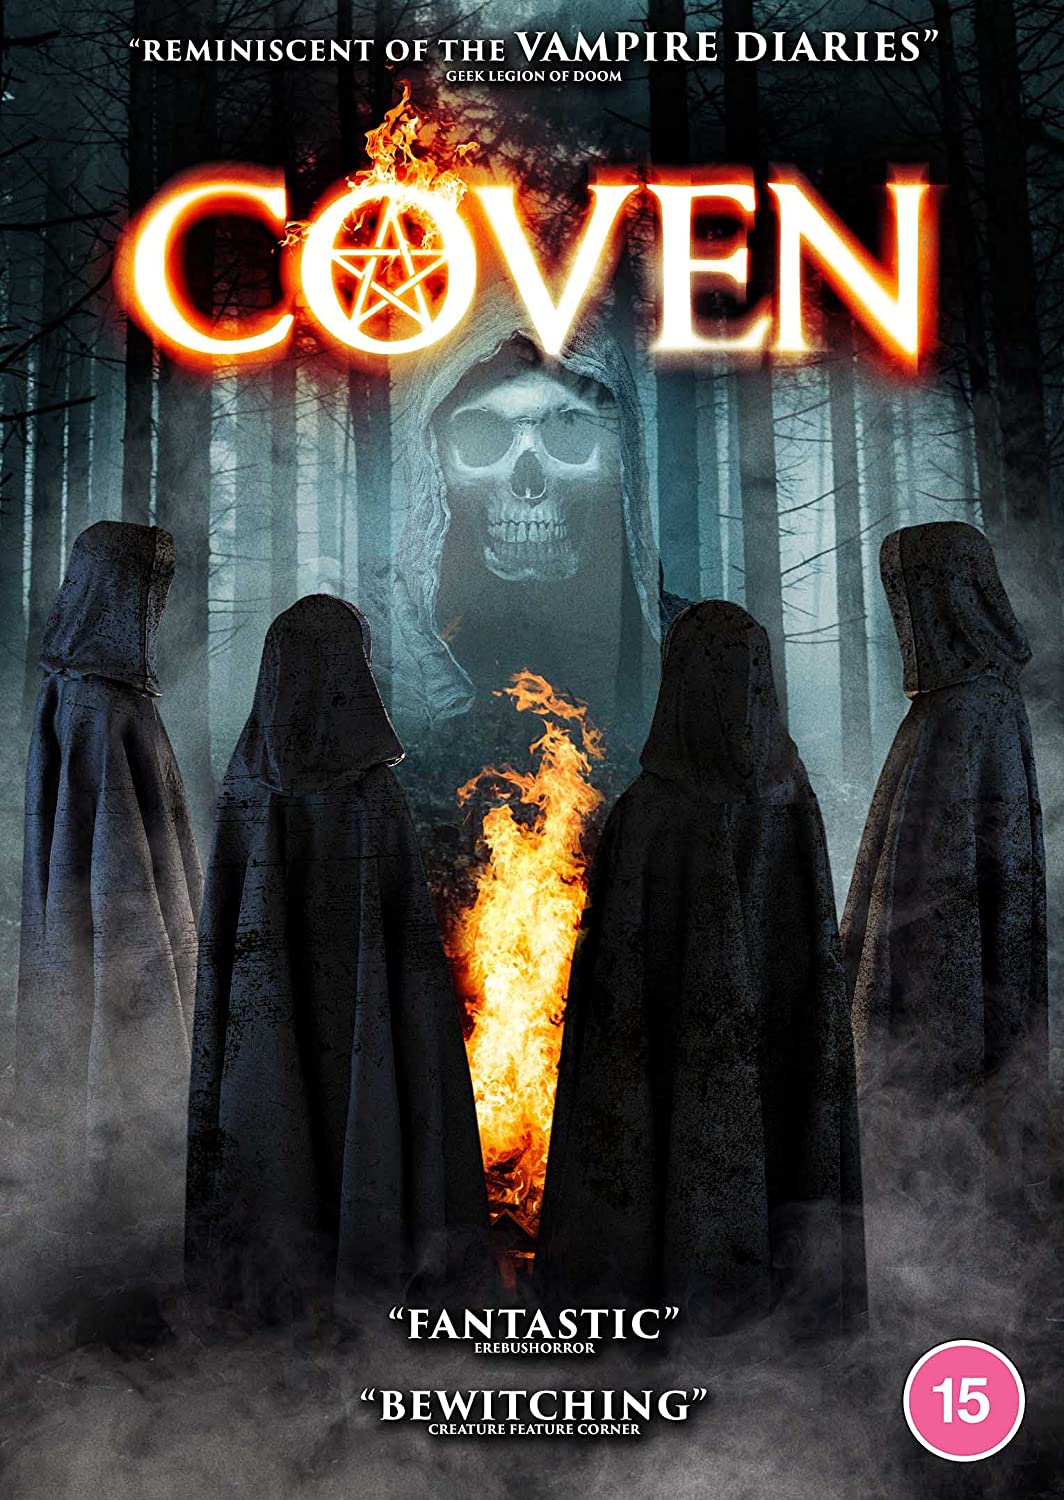 40 Years of Hell — Coven